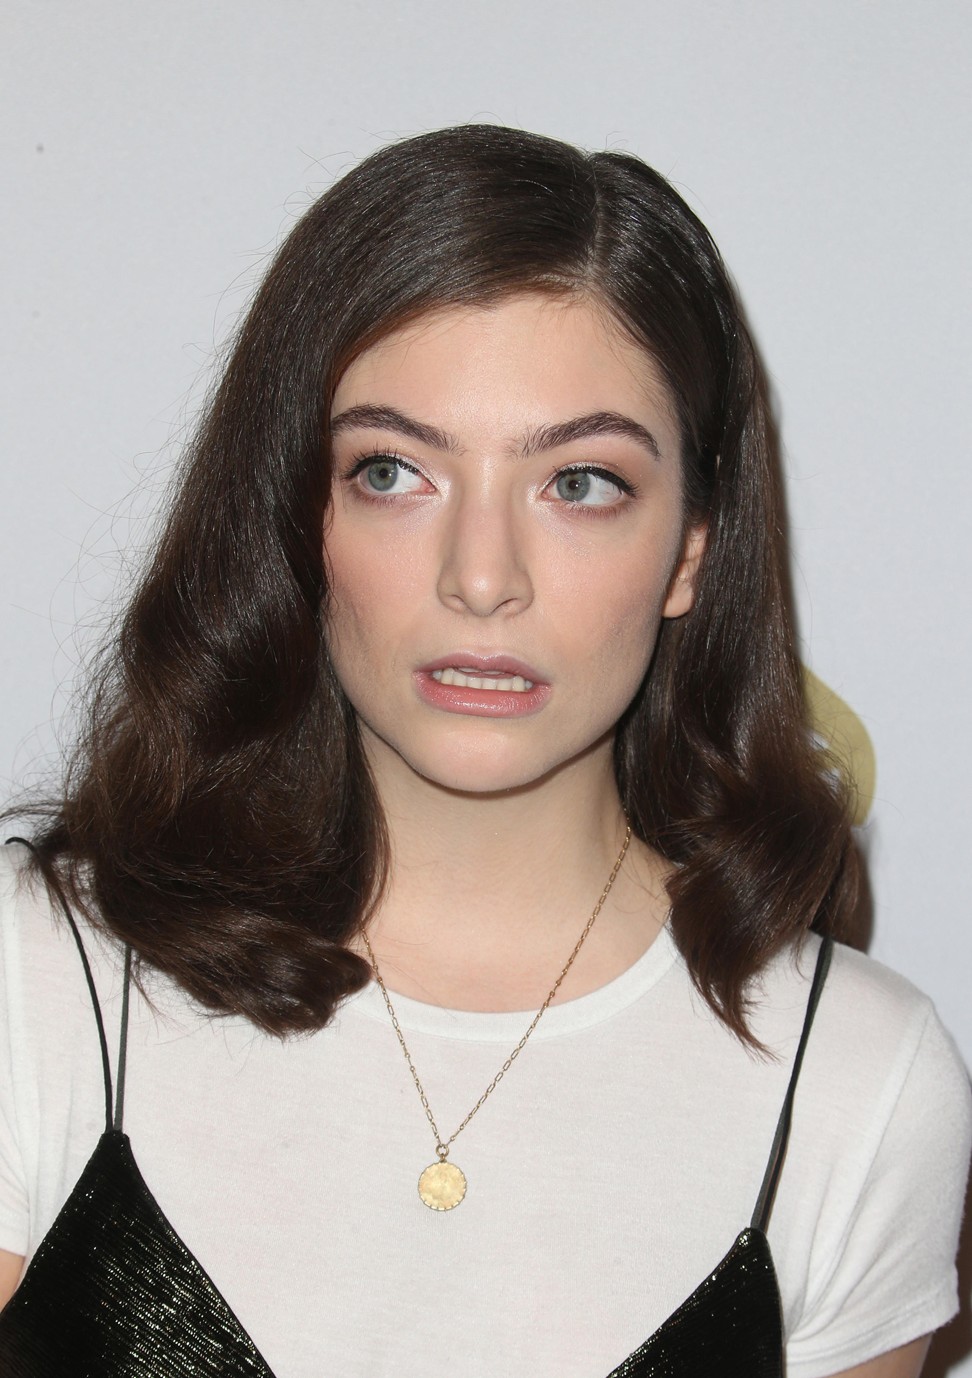 Lorde apologised for saying it wasn’t easy being friends with a superstar.